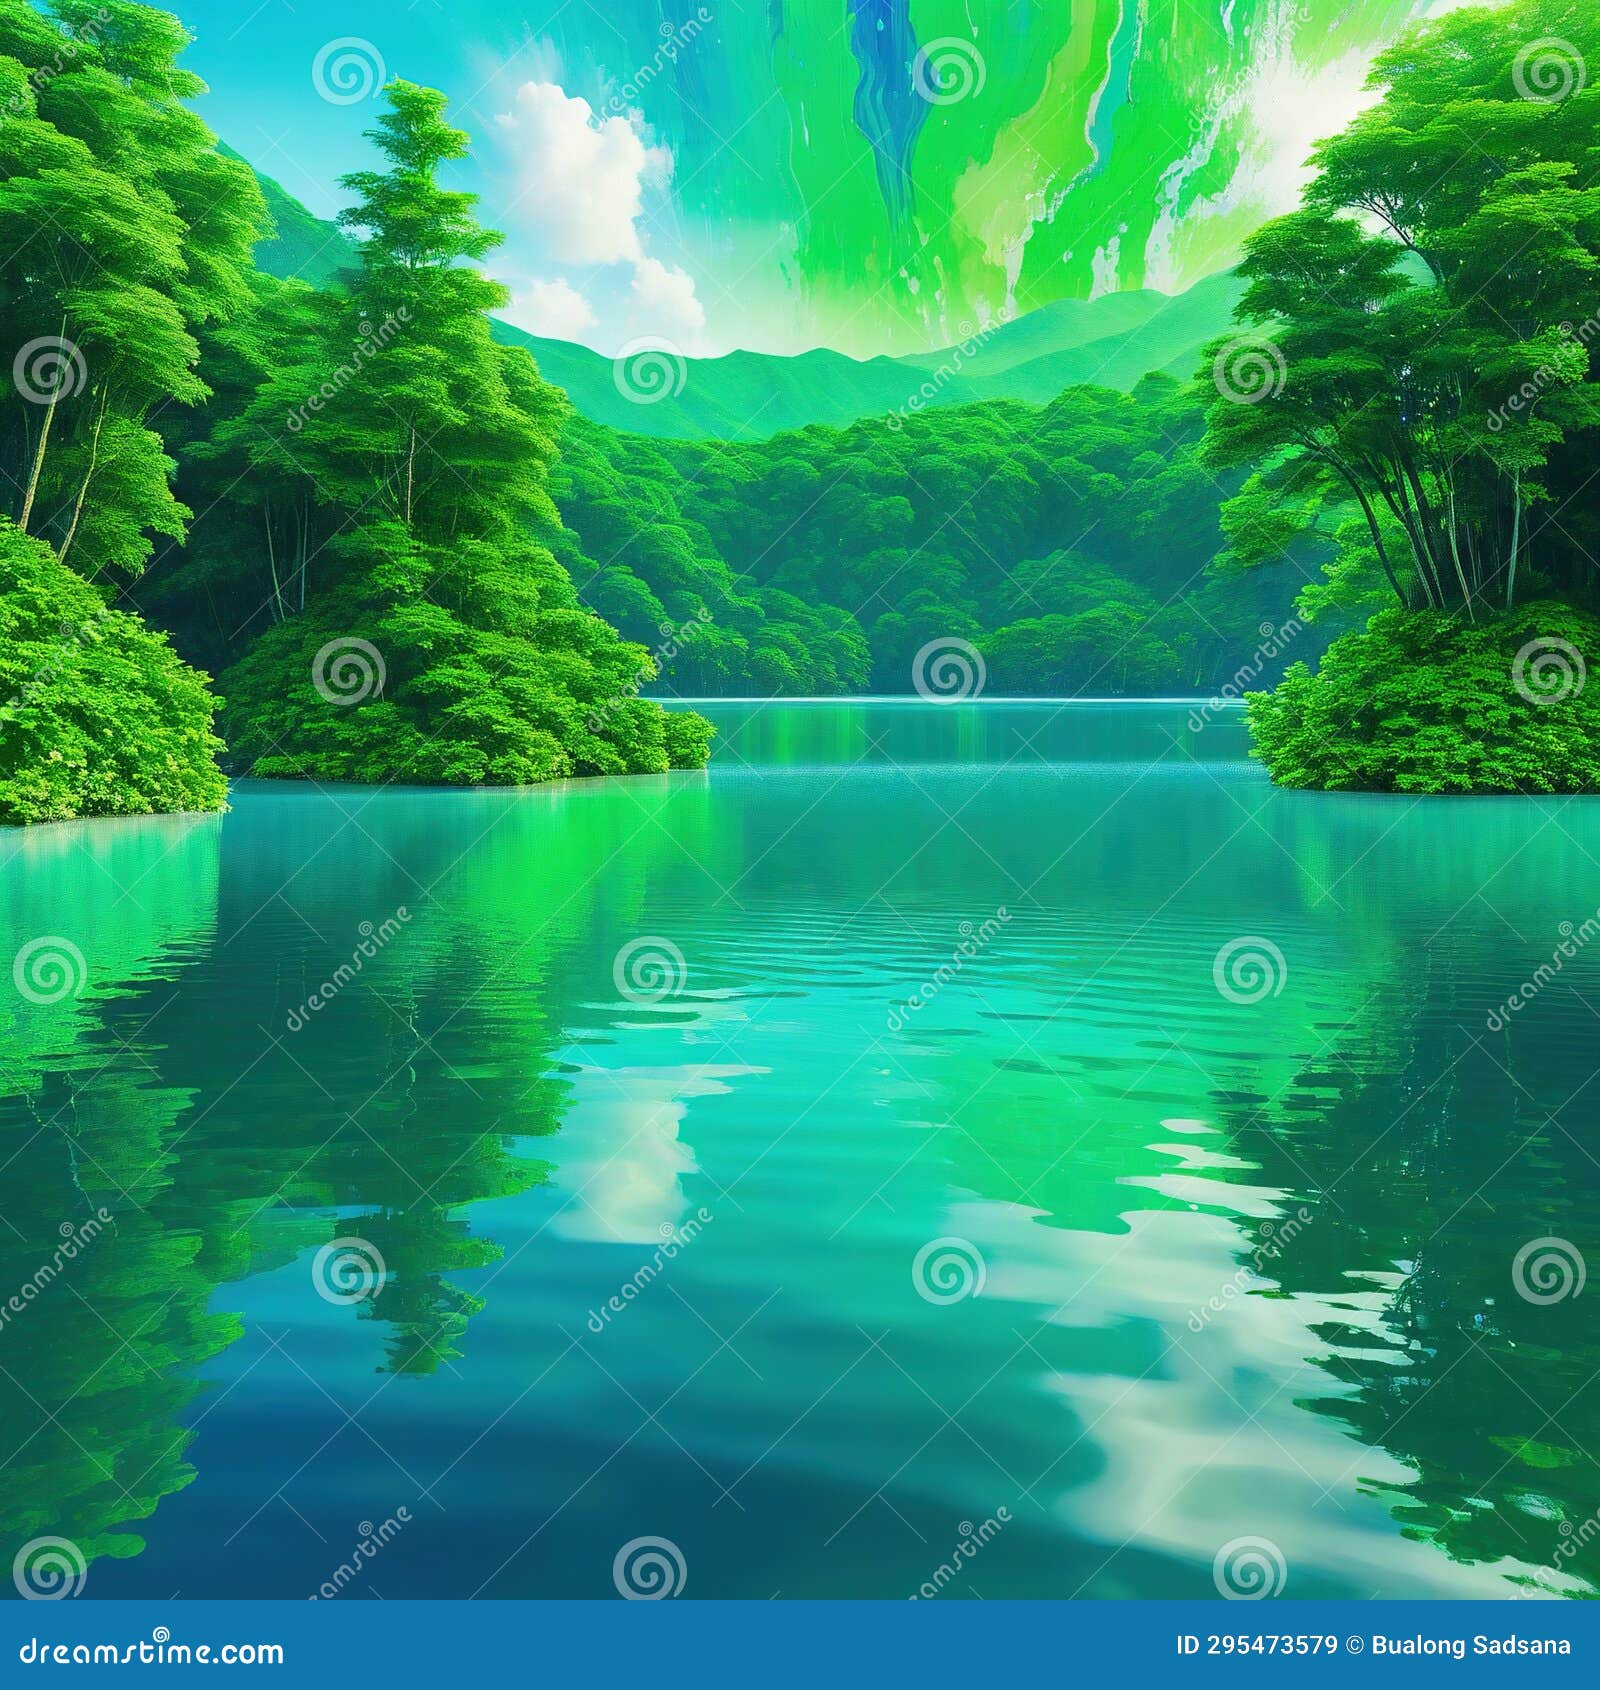 ai generated  wildlife concept of a digital artwork featuring a serene lake surrounded by lush